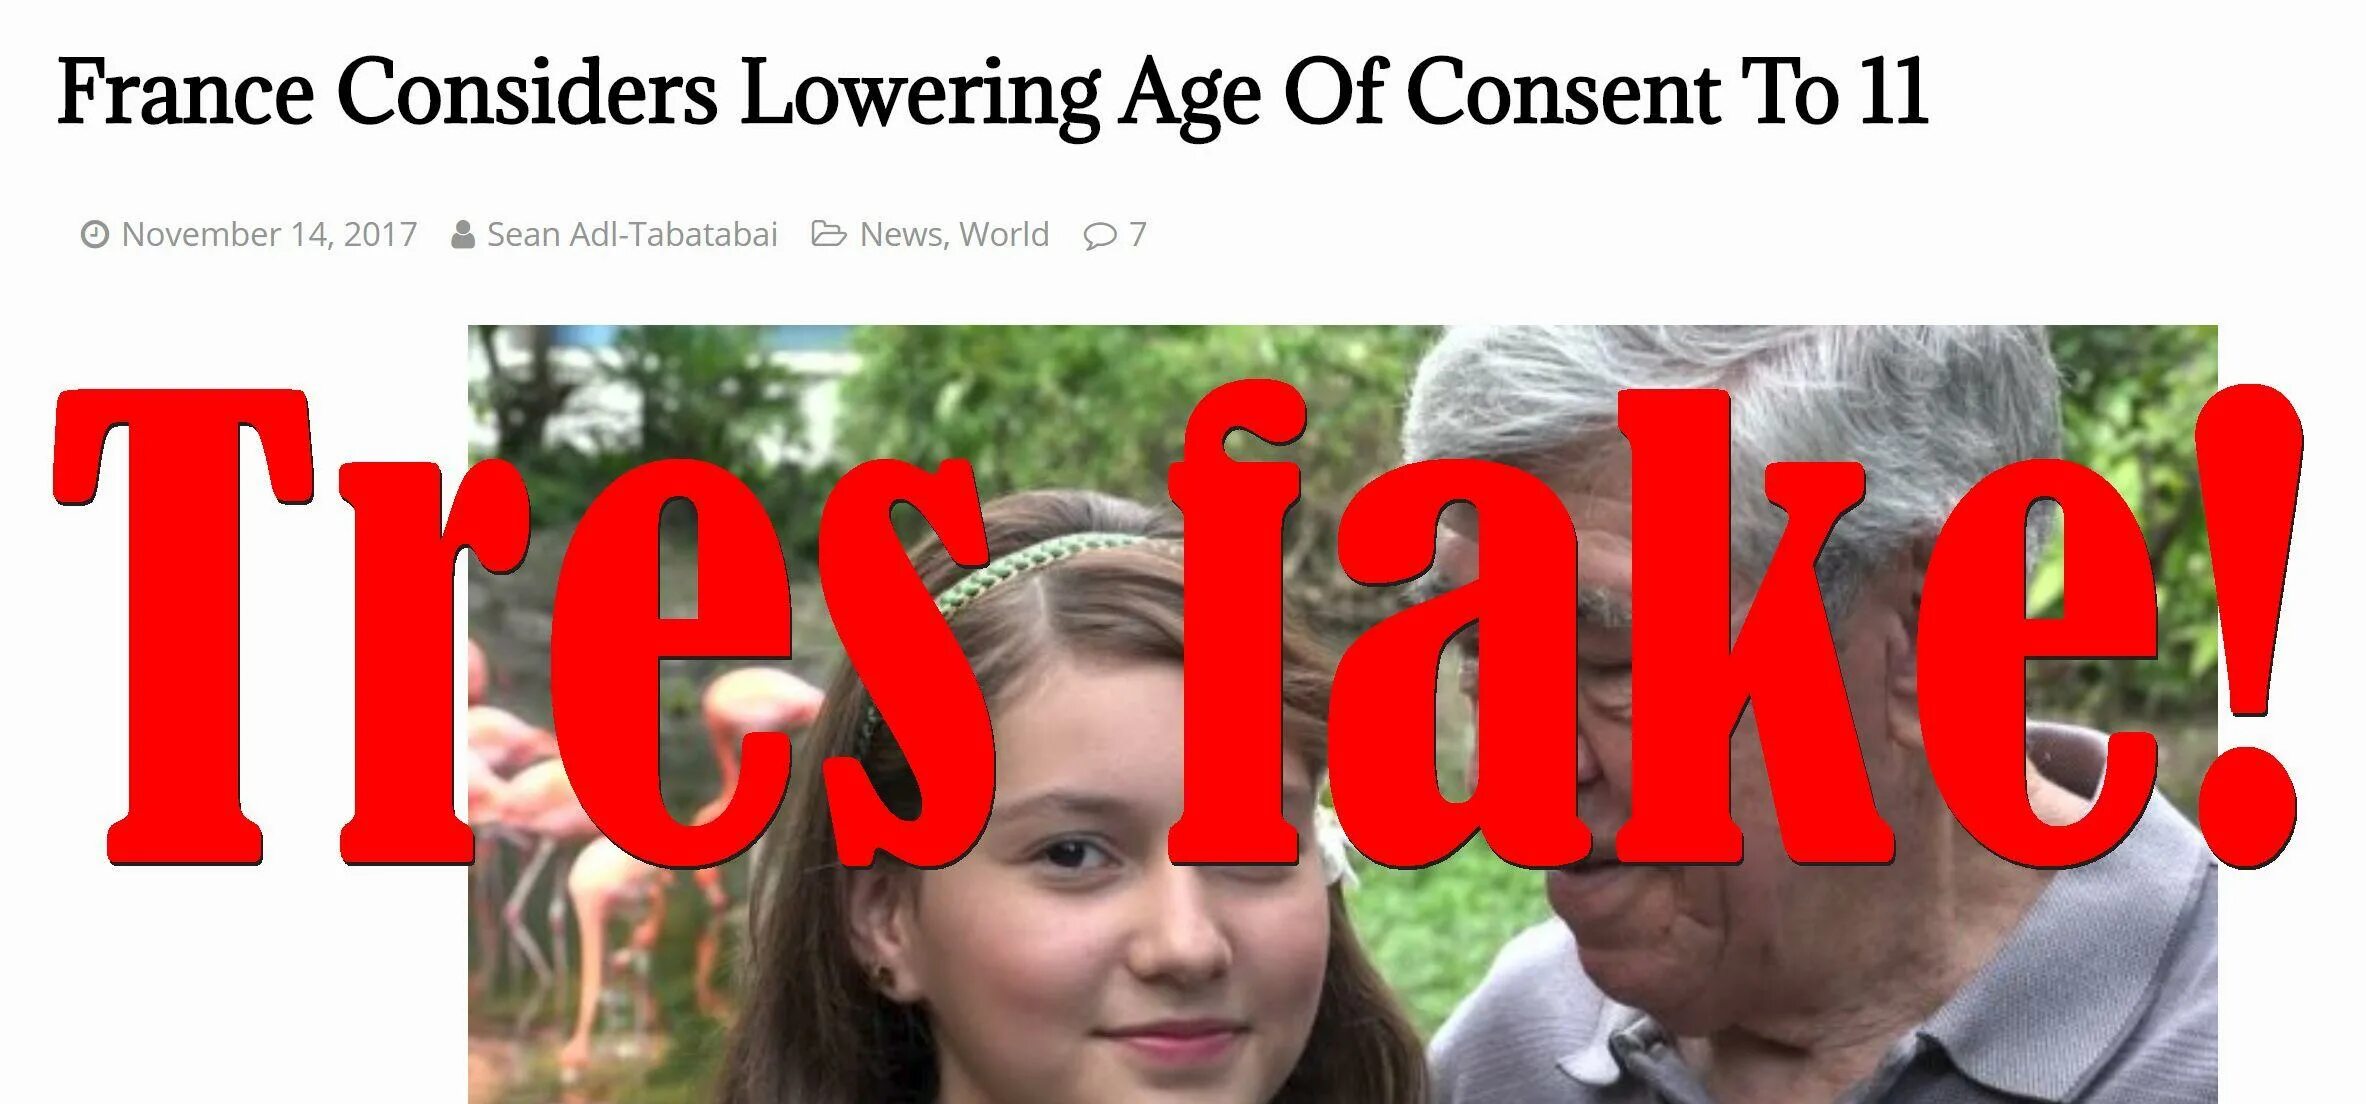 Age of consent in Italy.